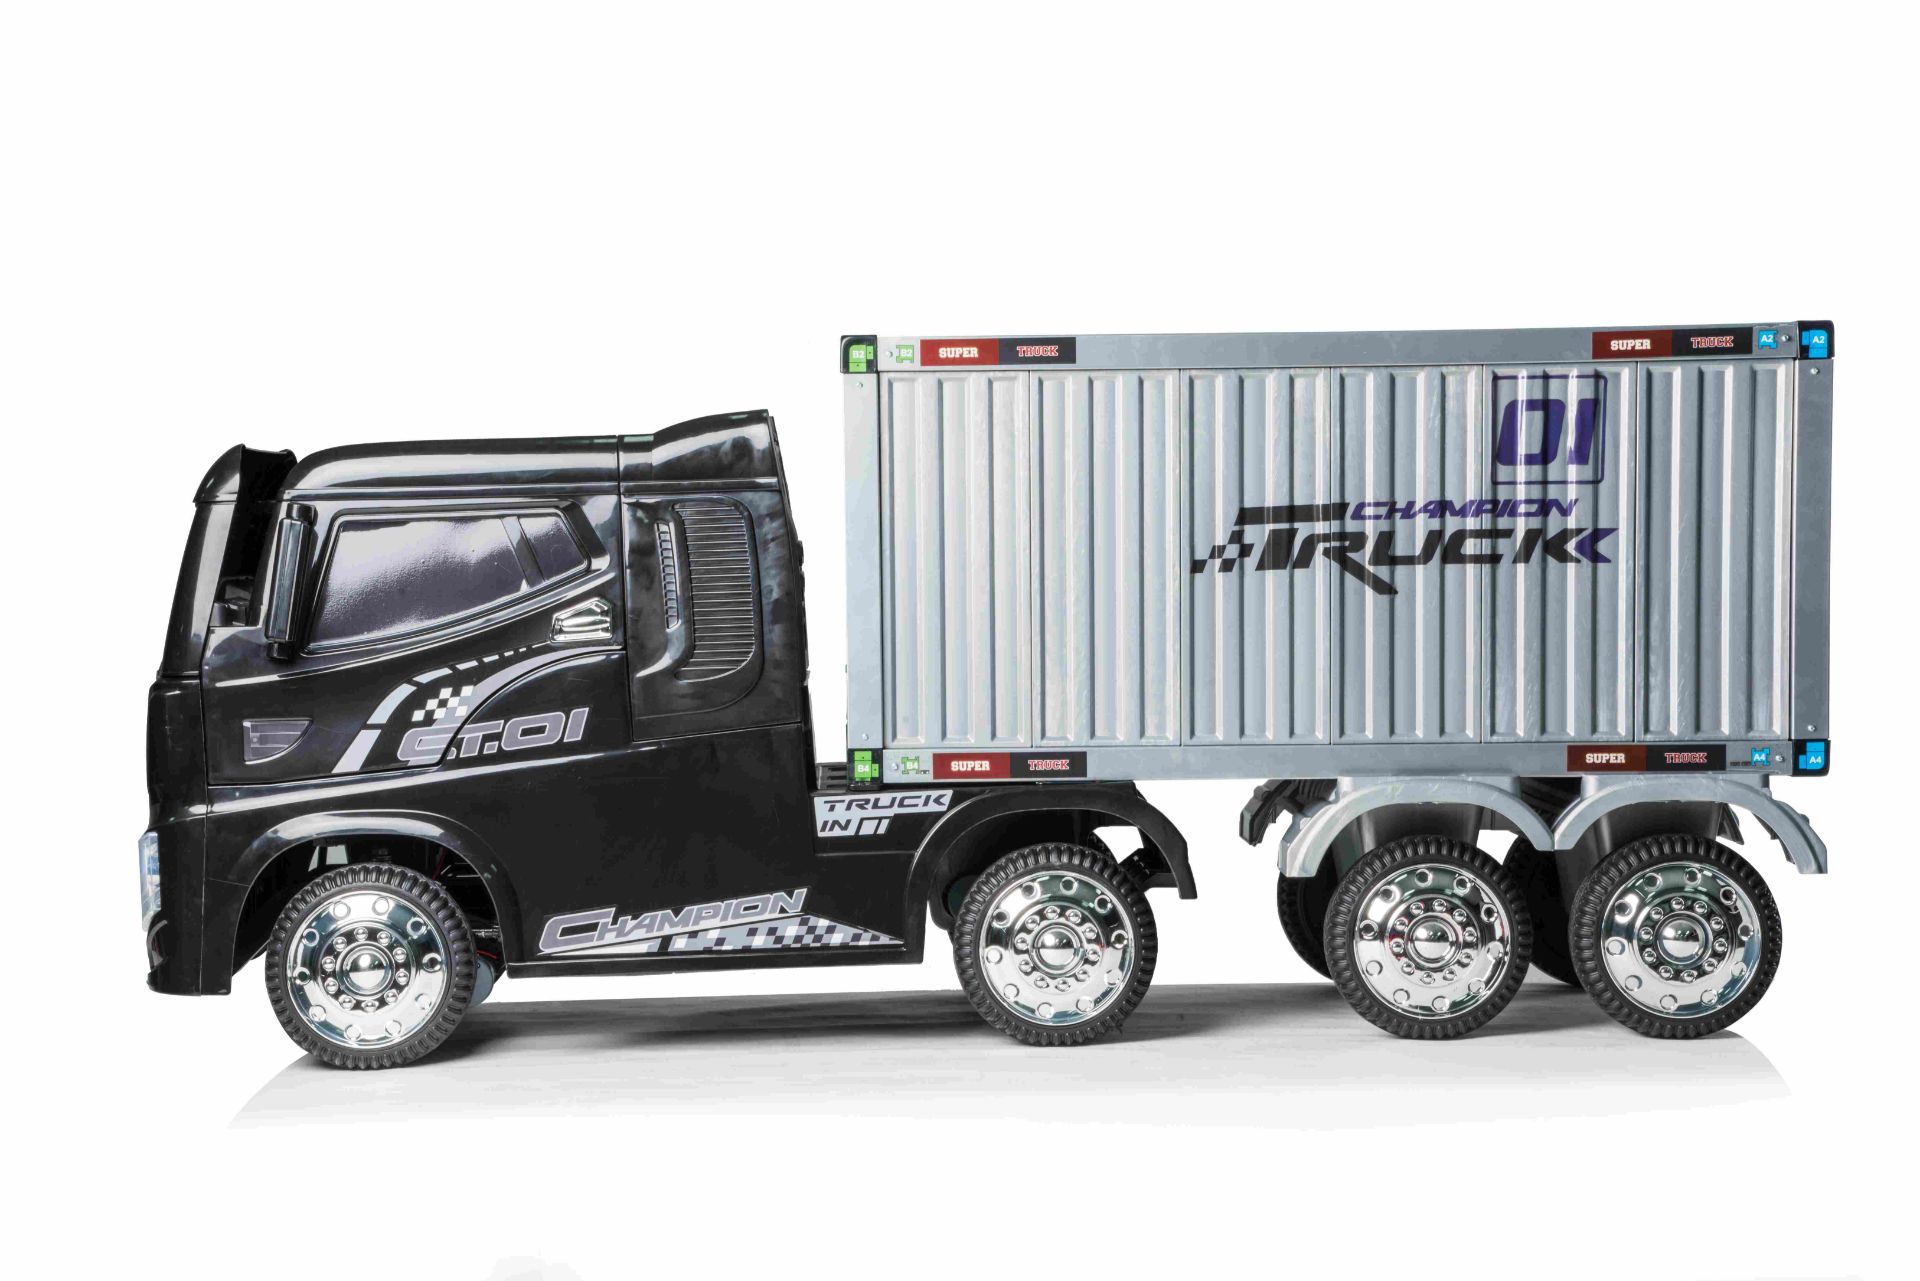 RIDE ON TRUCK WITH DETACHABLE CONTAINER AND PARENTAL REMOTE CONTROL 12V 4 WHEEL DRIVE JJ2011 - BLACK - Image 3 of 5